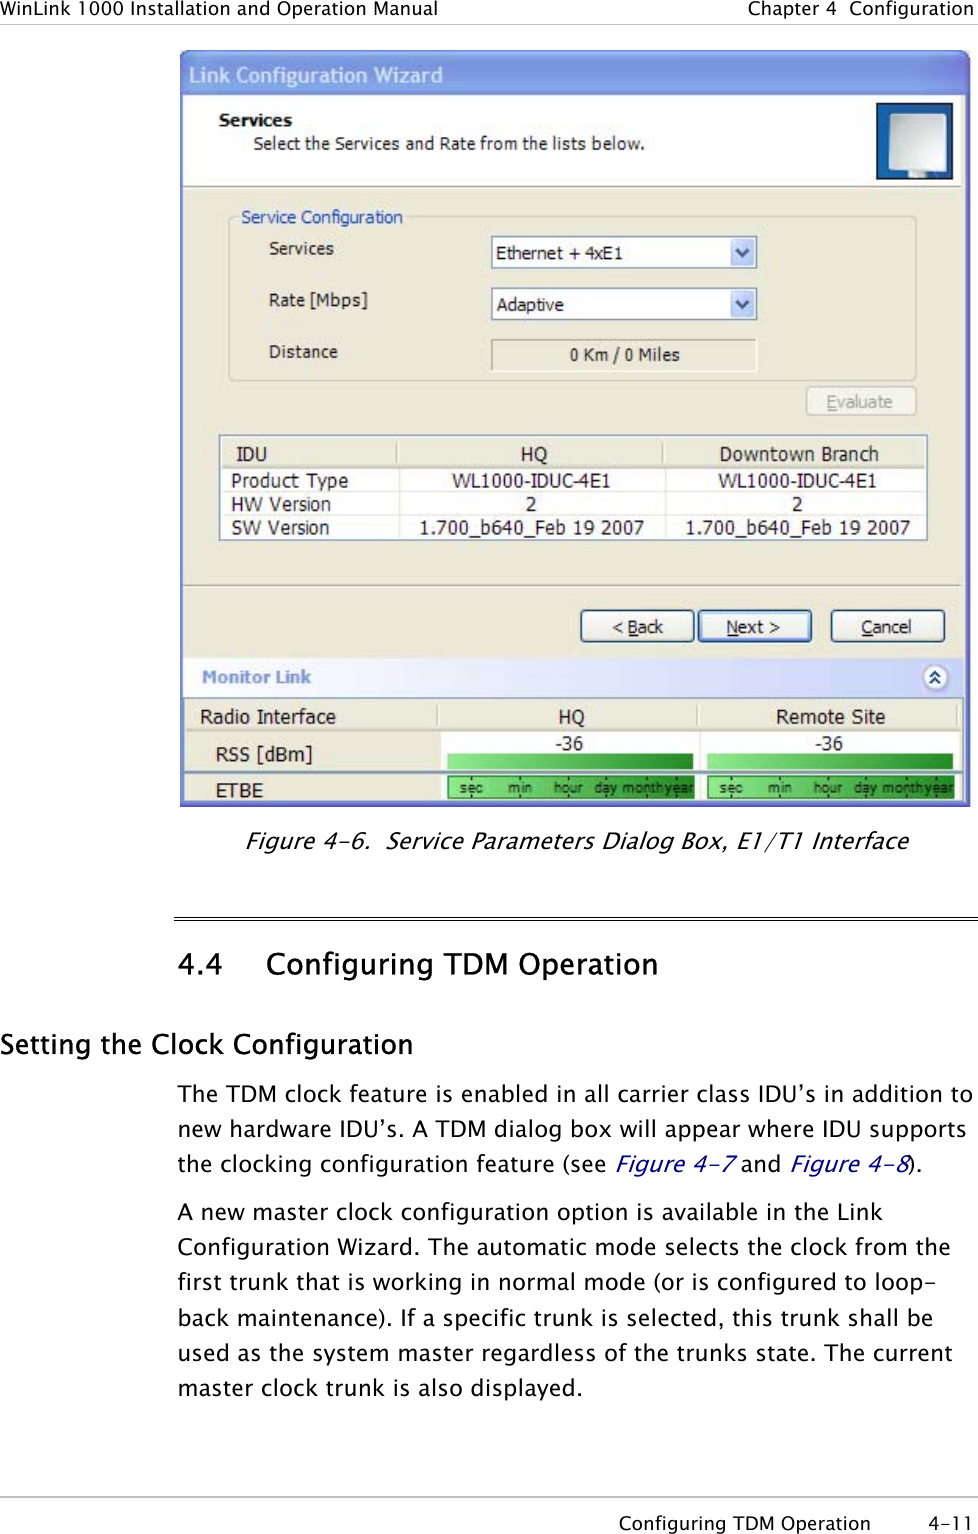 WinLink 1000 Installation and Operation Manual  Chapter  4  Configuration  Figure  4-6.  Service Parameters Dialog Box, E1/T1 Interface 4.4 Configuring TDM Operation Setting the Clock Configuration The TDM clock feature is enabled in all carrier class IDU’s in addition to new hardware IDU’s. A TDM dialog box will appear where IDU supports the clocking configuration feature (see Figure  4-7 and Figure  4-8). A new master clock configuration option is available in the Link Configuration Wizard. The automatic mode selects the clock from the first trunk that is working in normal mode (or is configured to loop-back maintenance). If a specific trunk is selected, this trunk shall be used as the system master regardless of the trunks state. The current master clock trunk is also displayed.  Configuring TDM Operation  4-11 